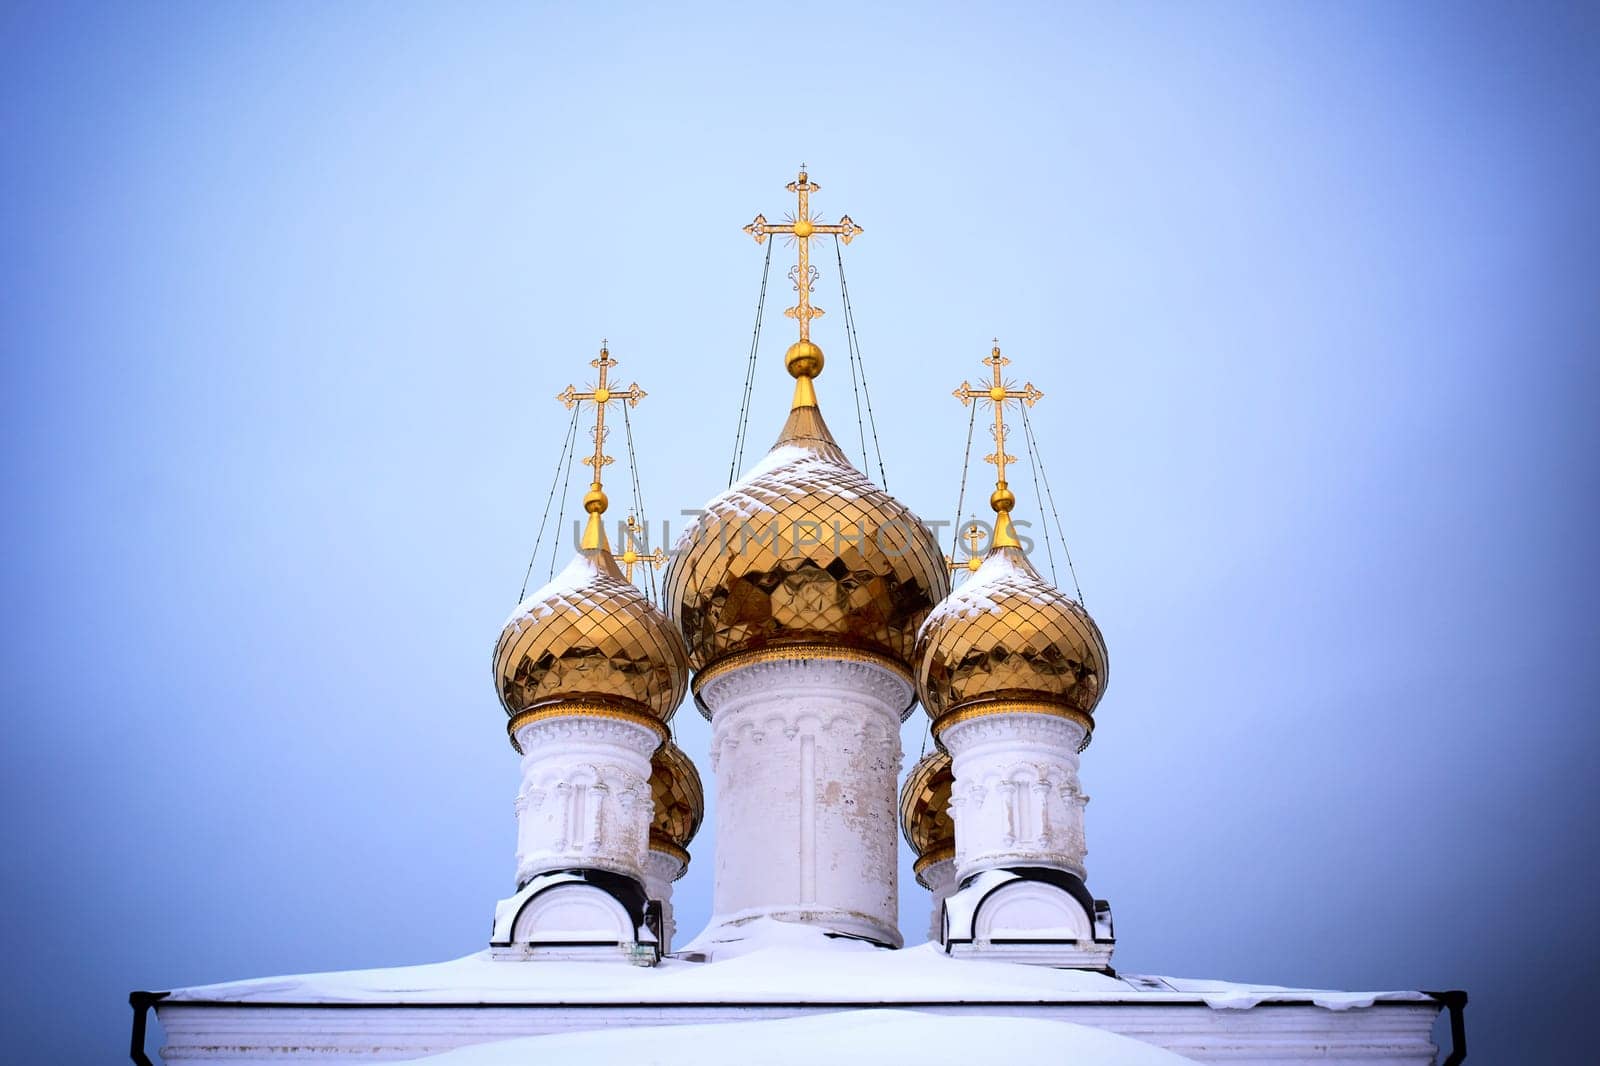 Orthodox church with golden domes and crosses in winter against the blue sky by DAndreev